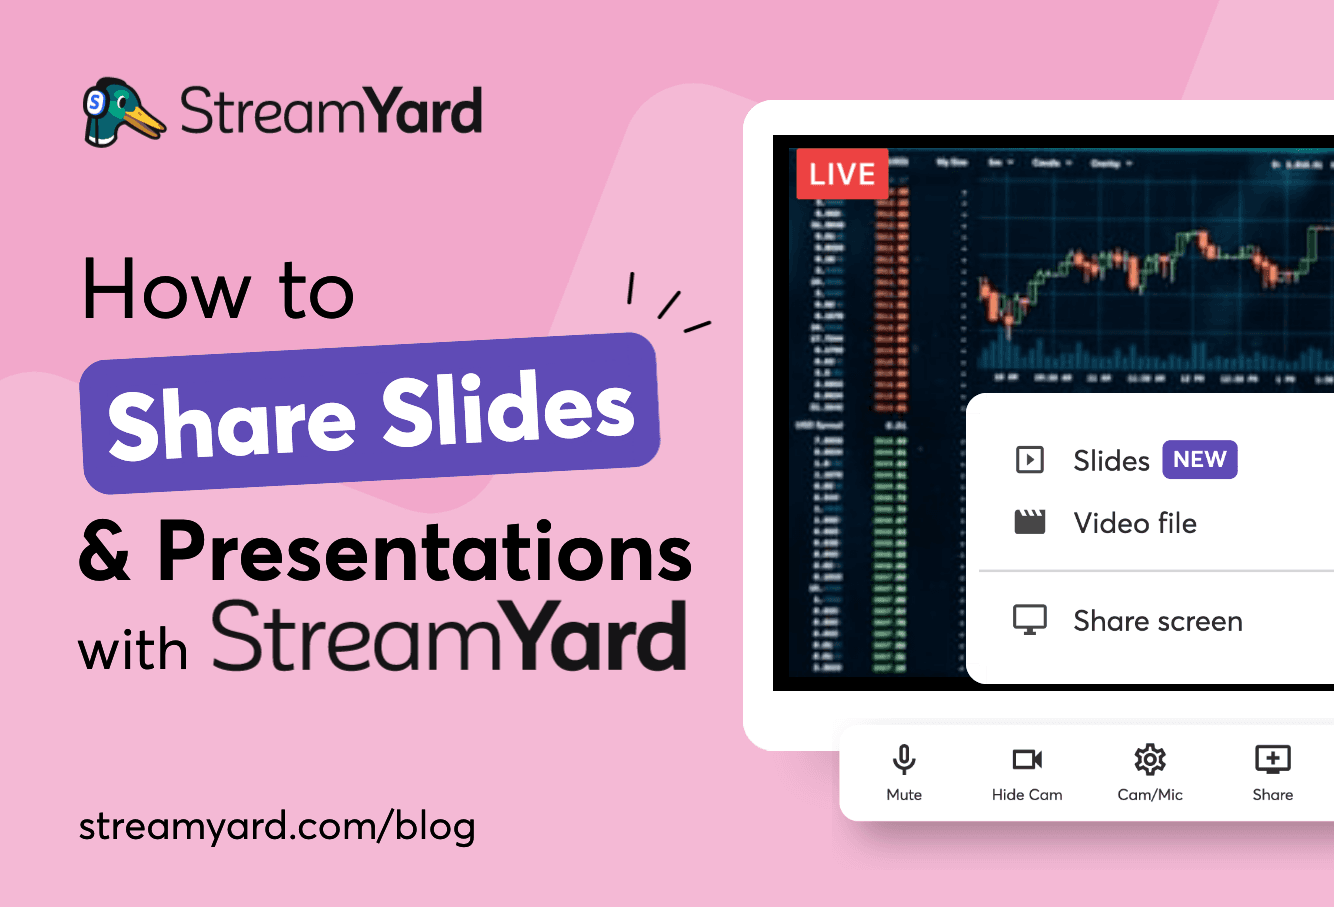 Learn how to share slides and presentations with StreamYard and engage your audience better by delivering key information through your slides.